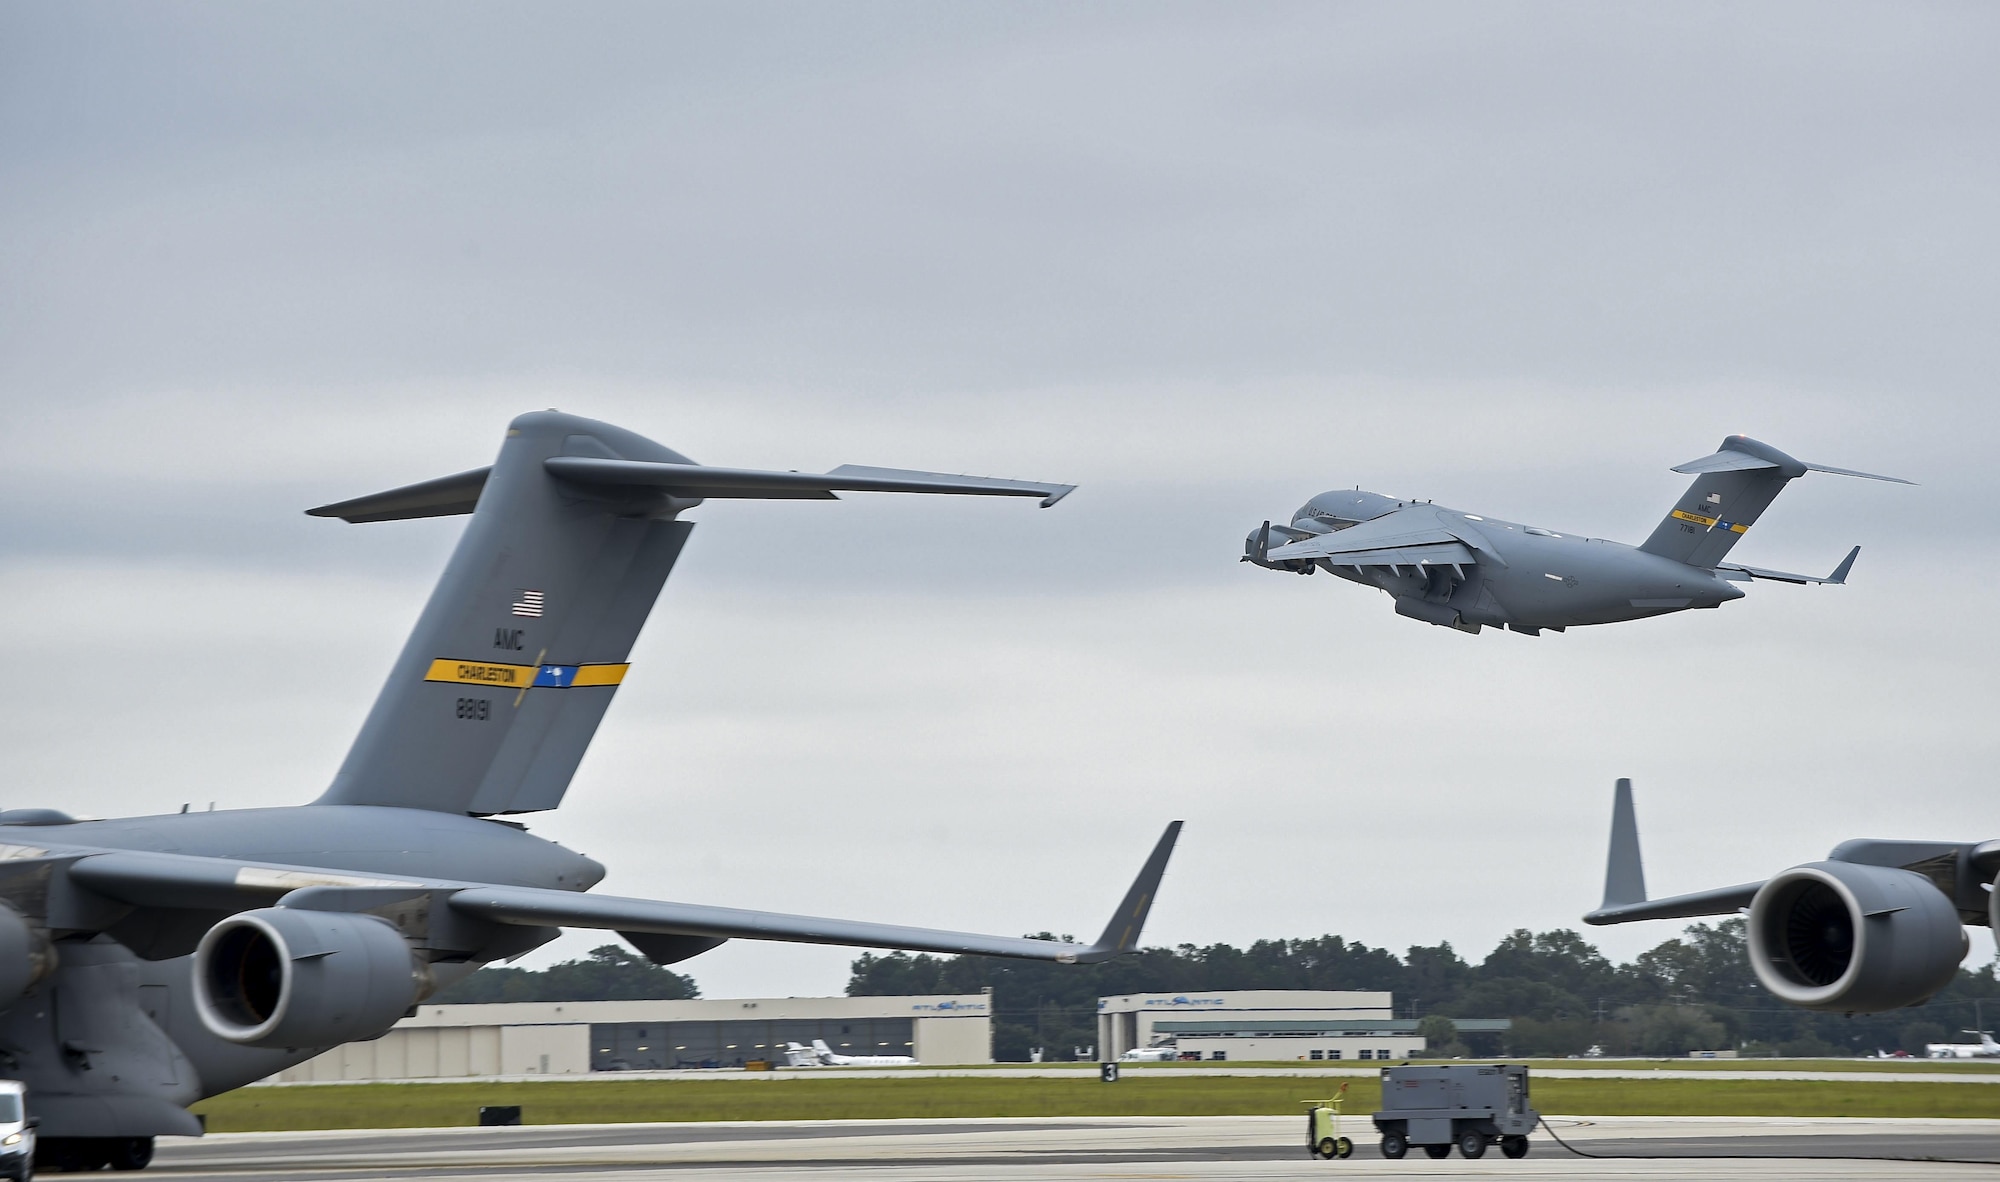 Joint Base Charleston C-17 Globemaster IIIs evacuate to Fort Campbell, KY on Oct. 6, 2016 to continue their mission of rapid global mobility during Hurricane Matthew. Due to Hurricane Matthew, a Limited Evacuation Order of South Carolina Hurricane Evacuation Zones was issued by the Commander, Joint Base Charleston. All Joint Base personnel are expected to evacuate the area and will return once damage is assessed and it’s safe to return. (U.S. Air Force photo by Senior Airman Nicholas Byers)